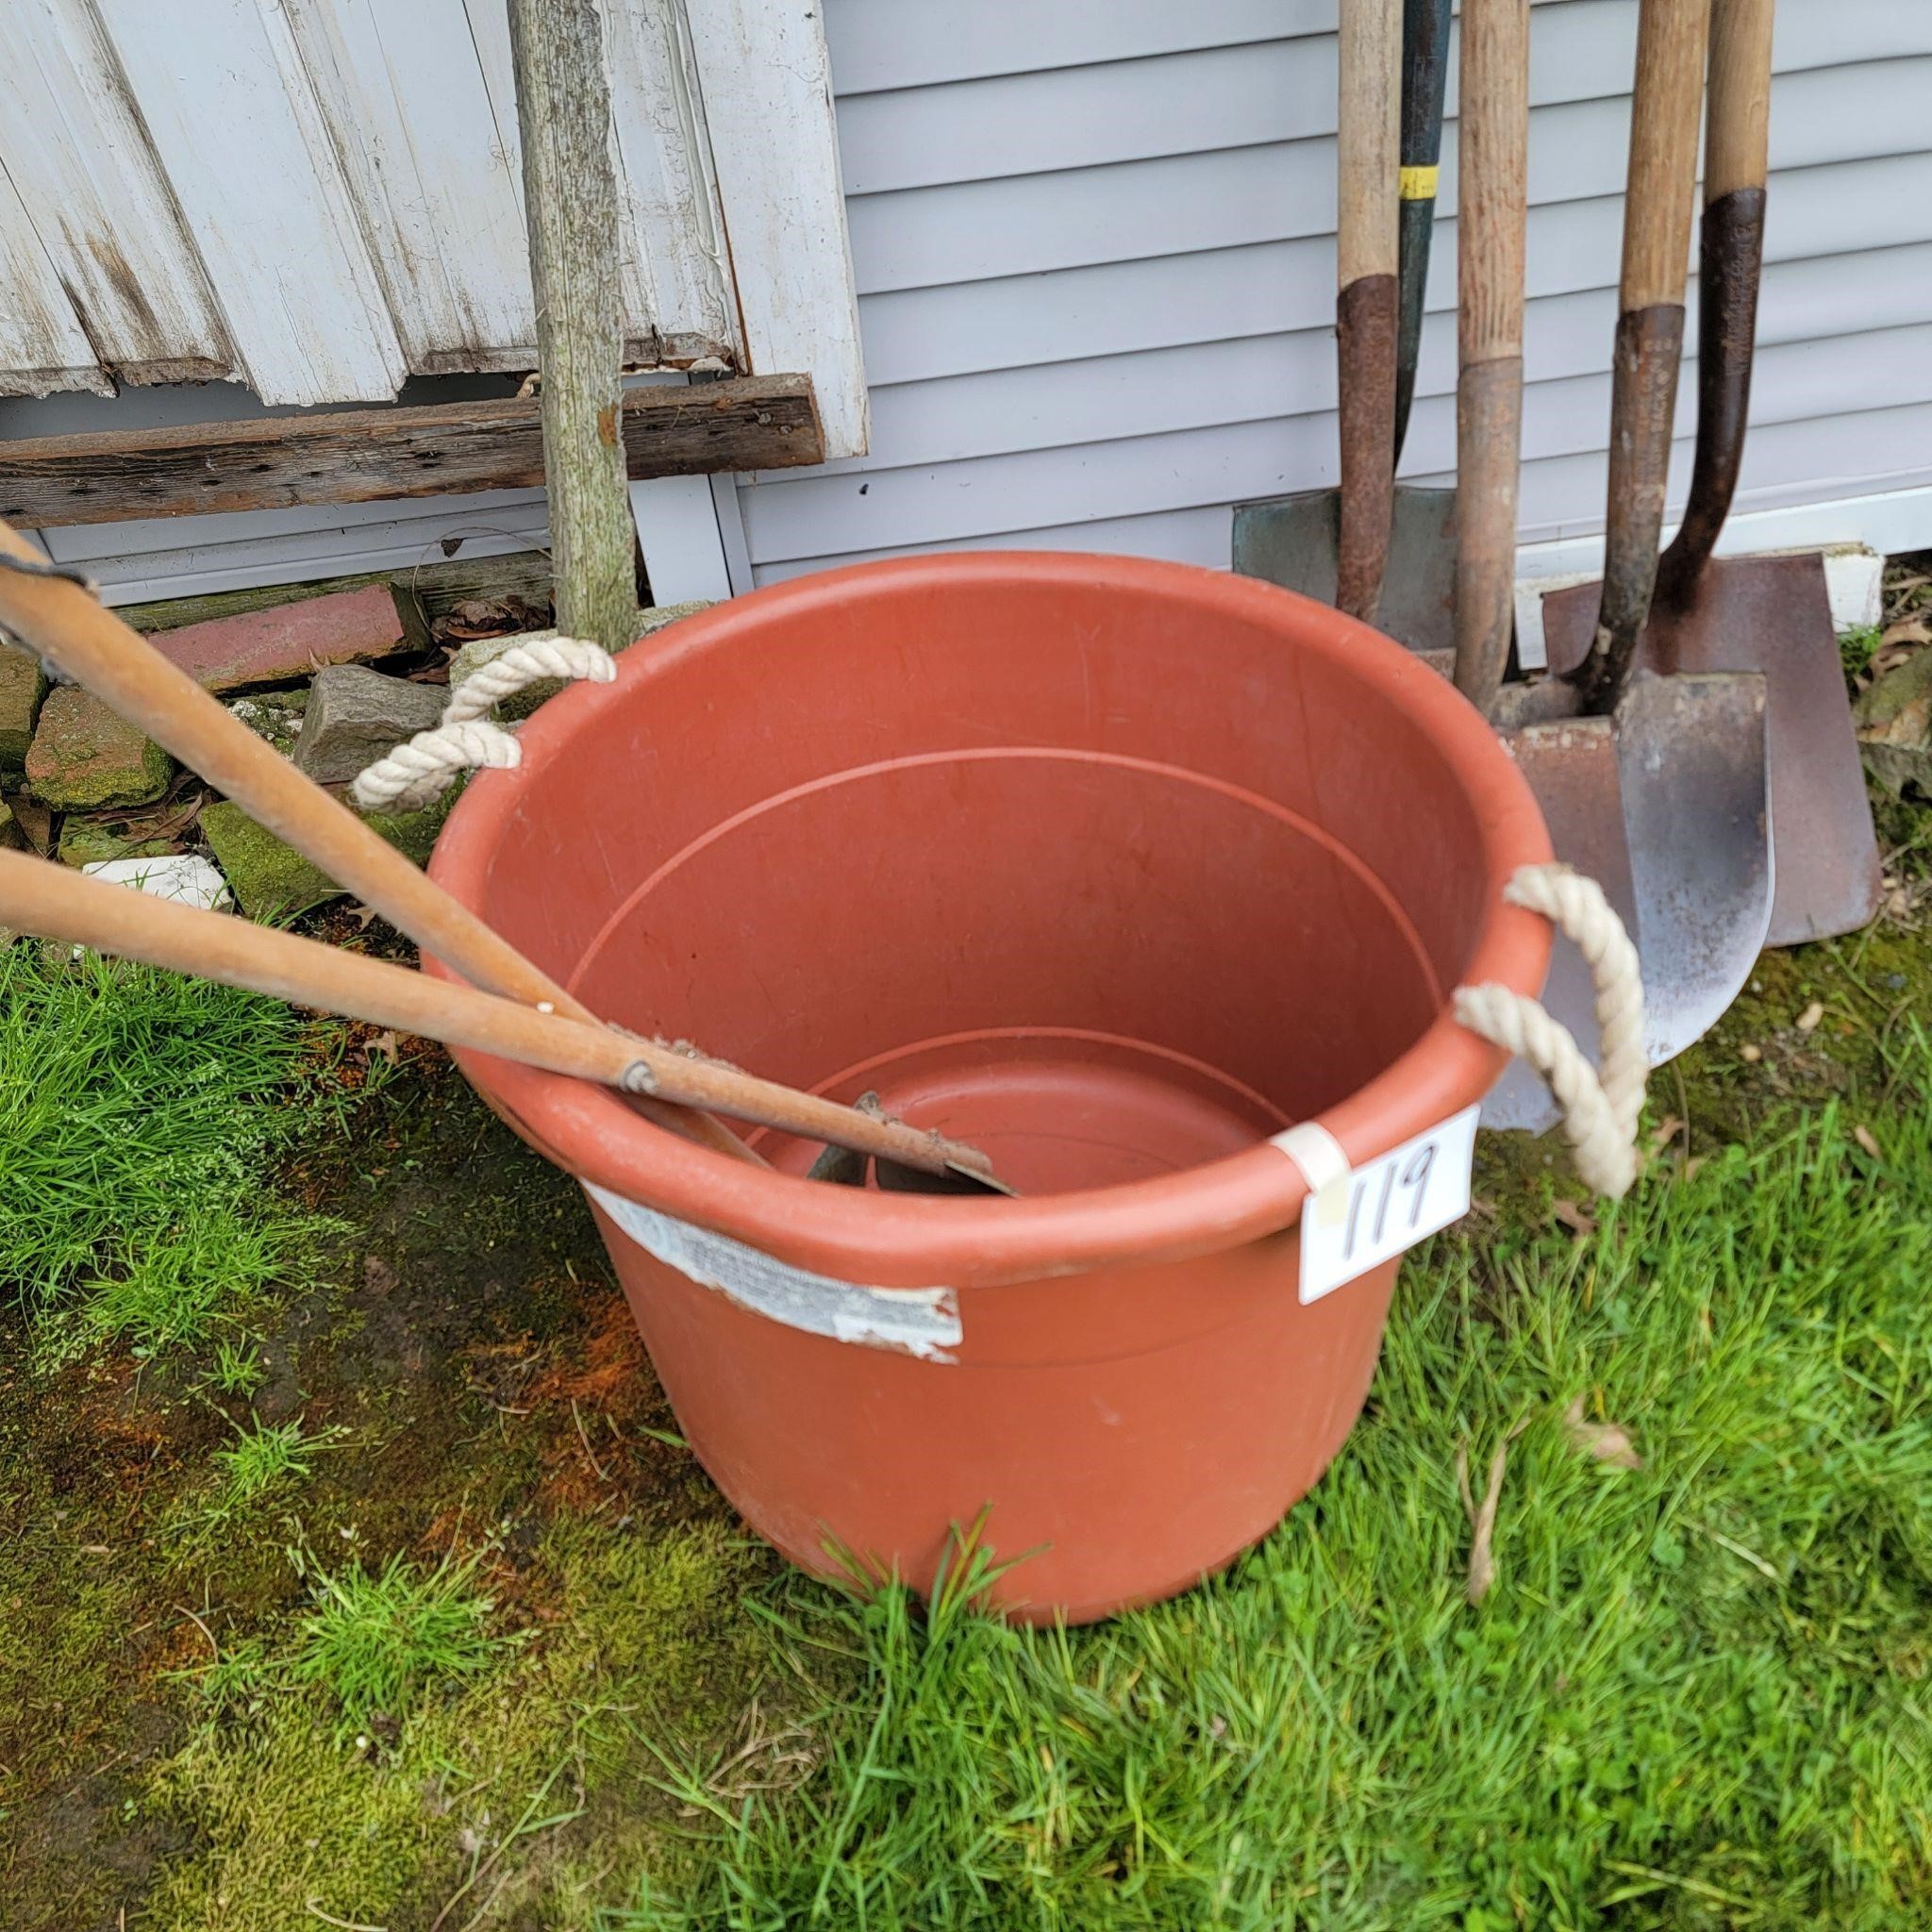 Red Keg Bucket with Pooper Scooper and Shovels